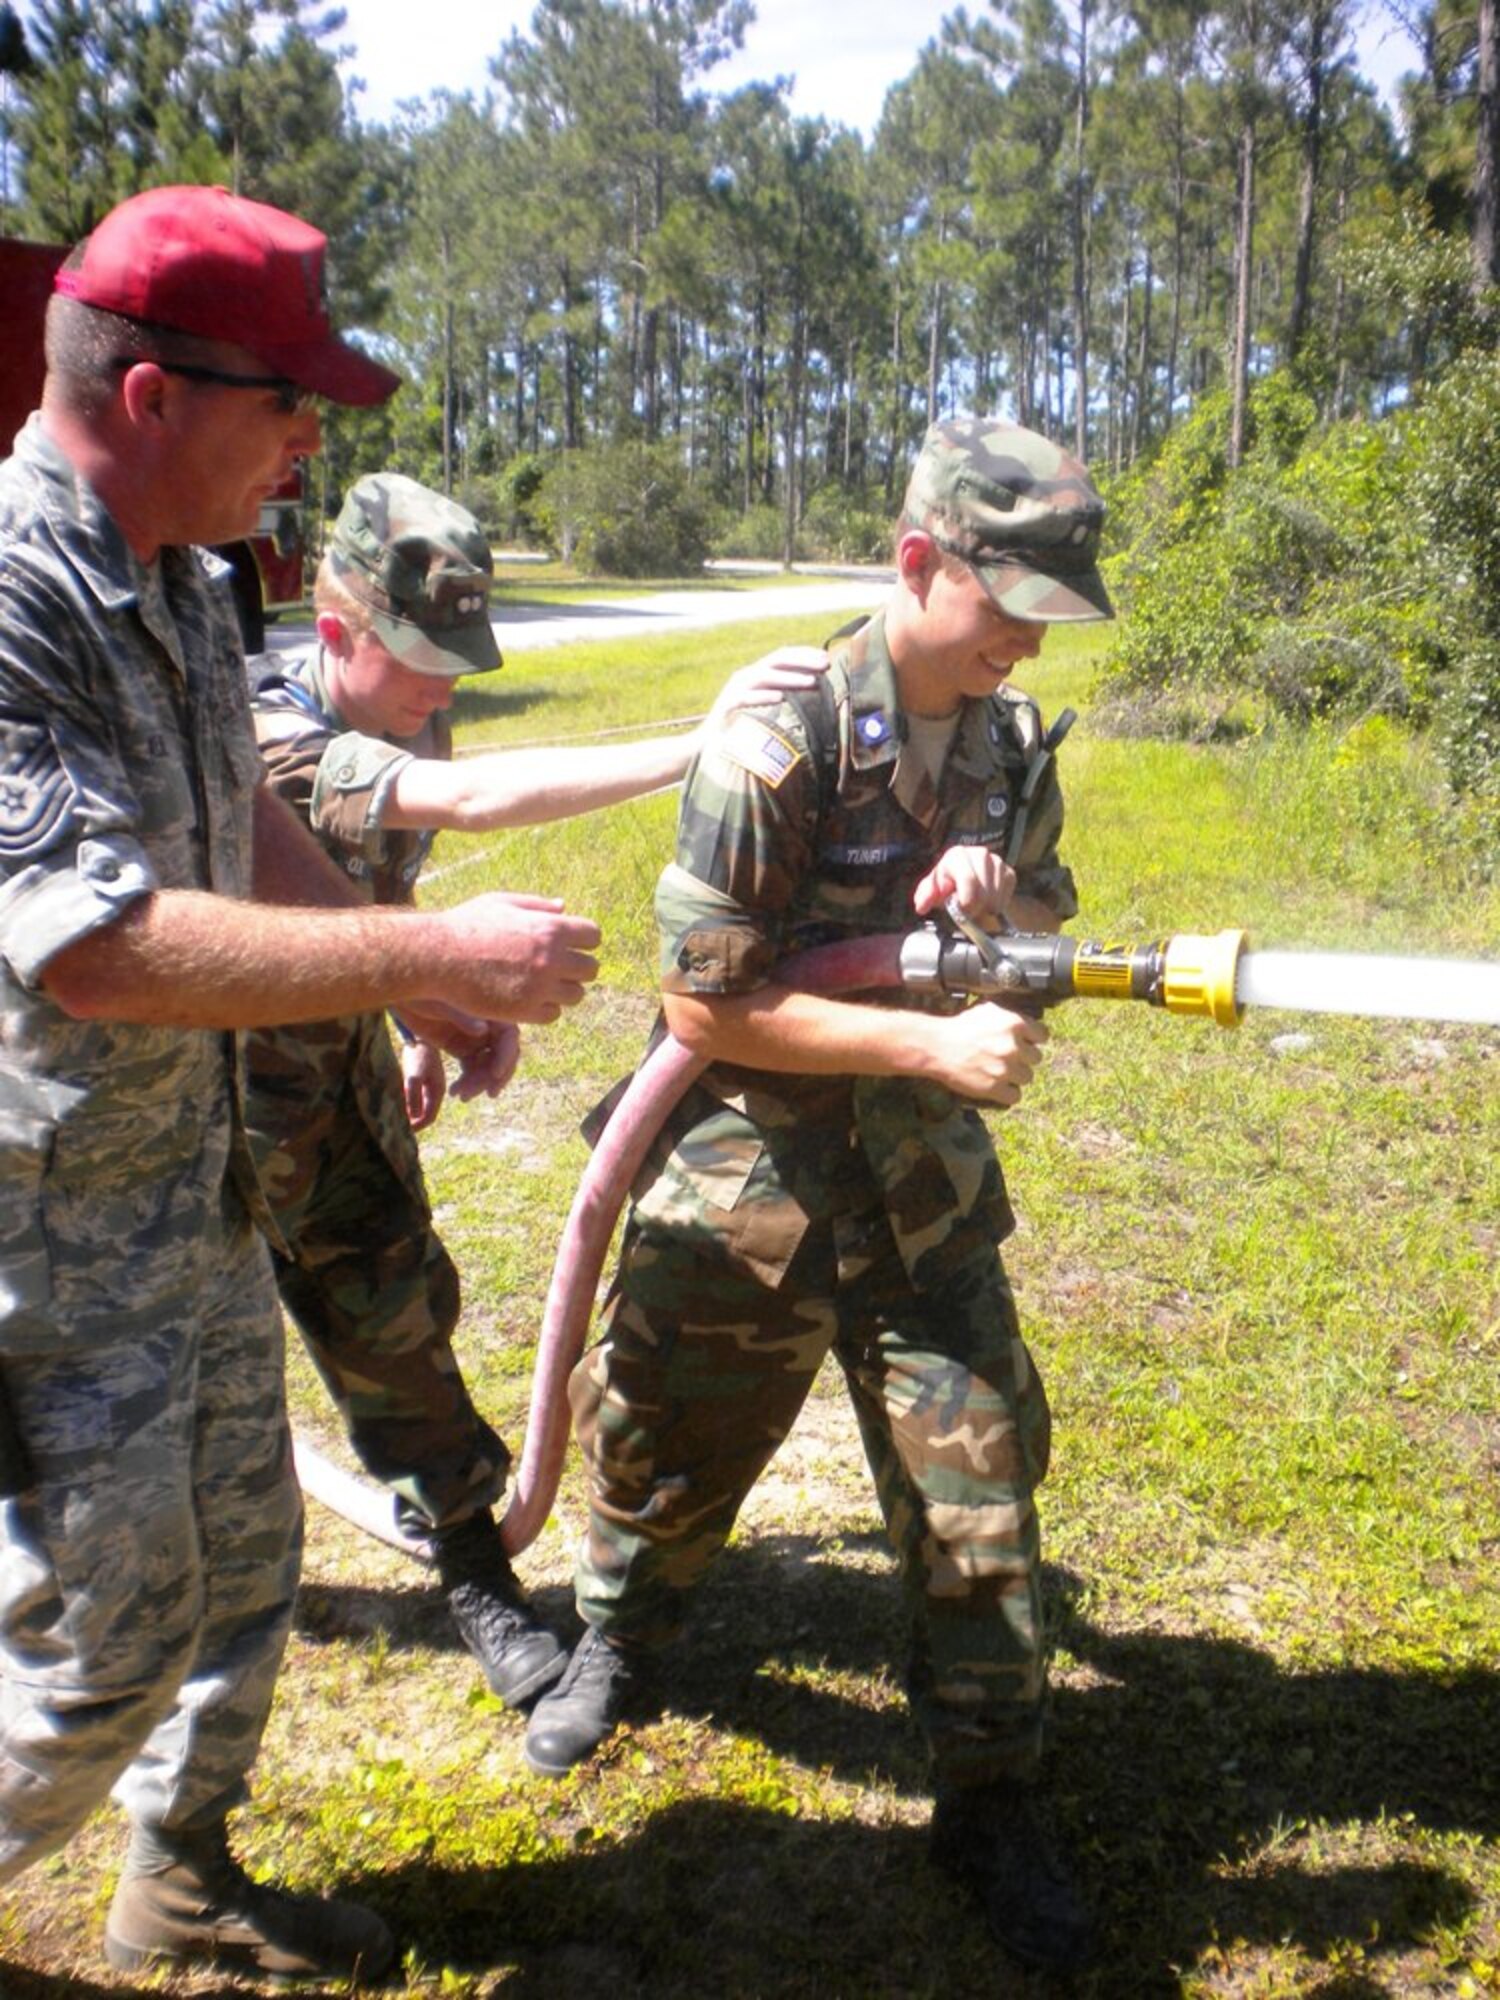 Cadet 2nd Lt. Nicholas Tunnell from Minnesota Wing's St. Paul Composite
Squadron uses a fire hose during a fire fighting demonstration at the Civil Air Patrol's Air Force Civil Engineering Academy at Tyndall. (Courtesy photo)
